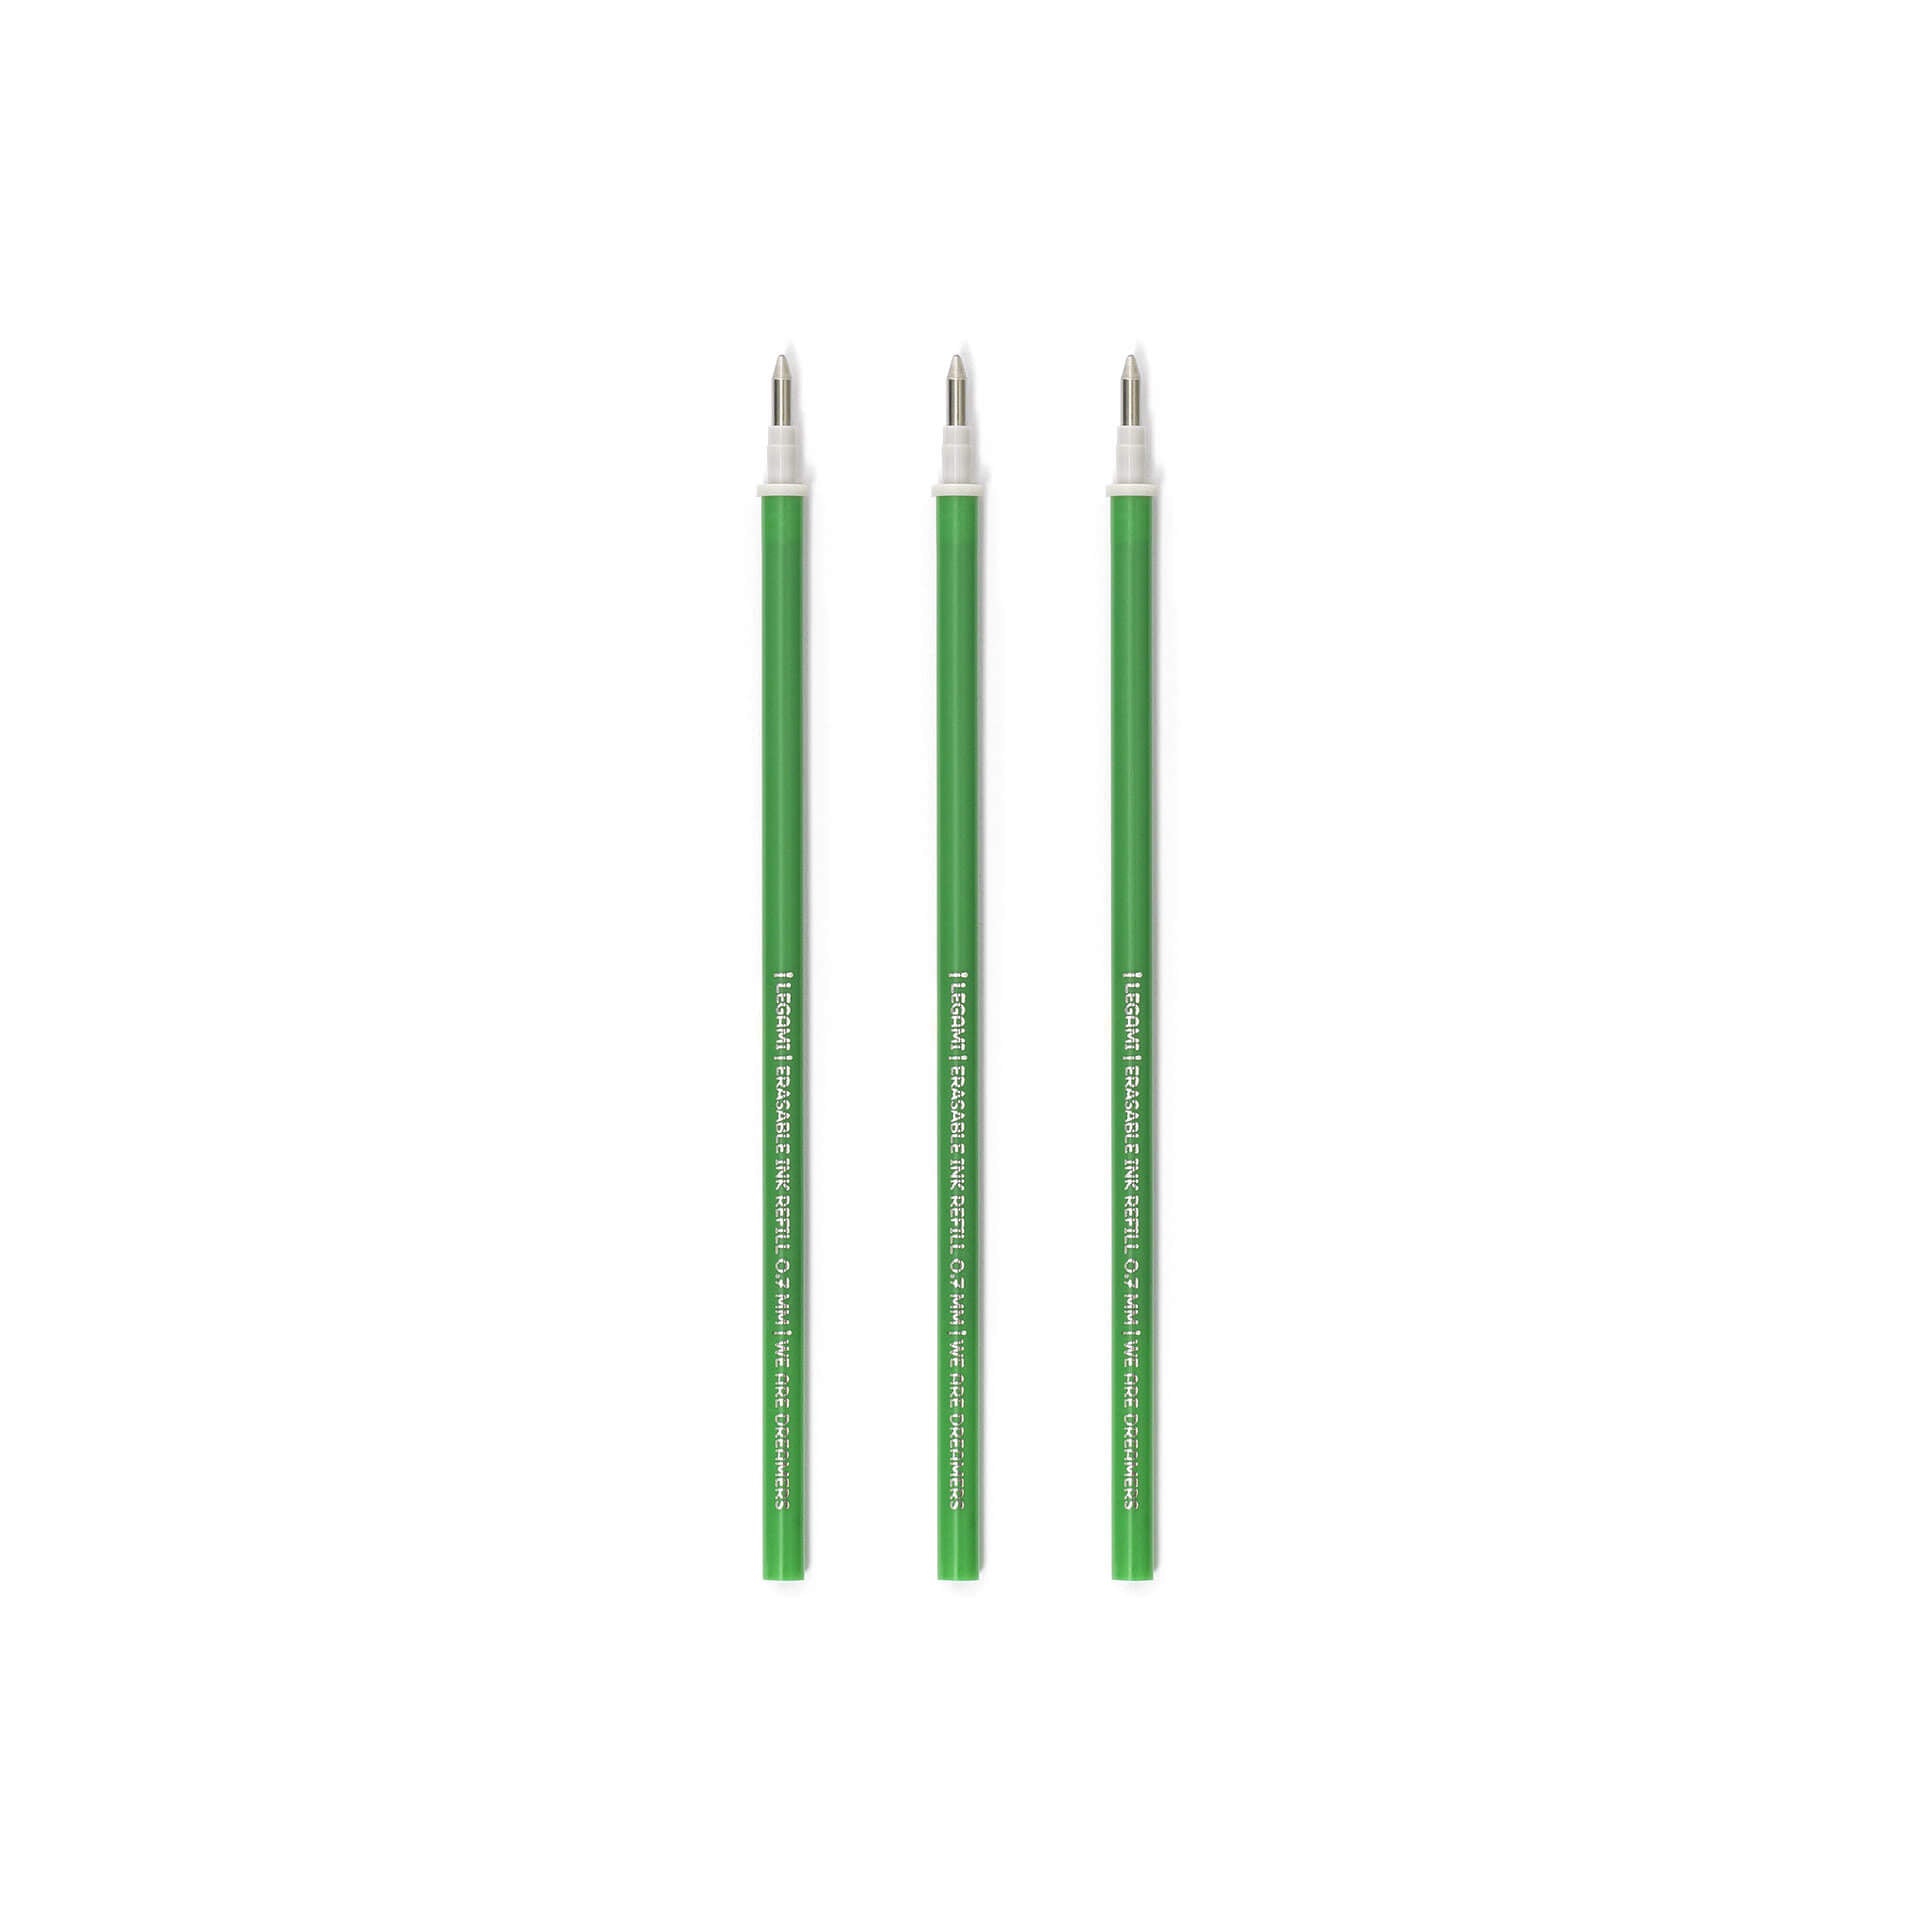 3 Green Legami Erasable Pen Refills without packaging